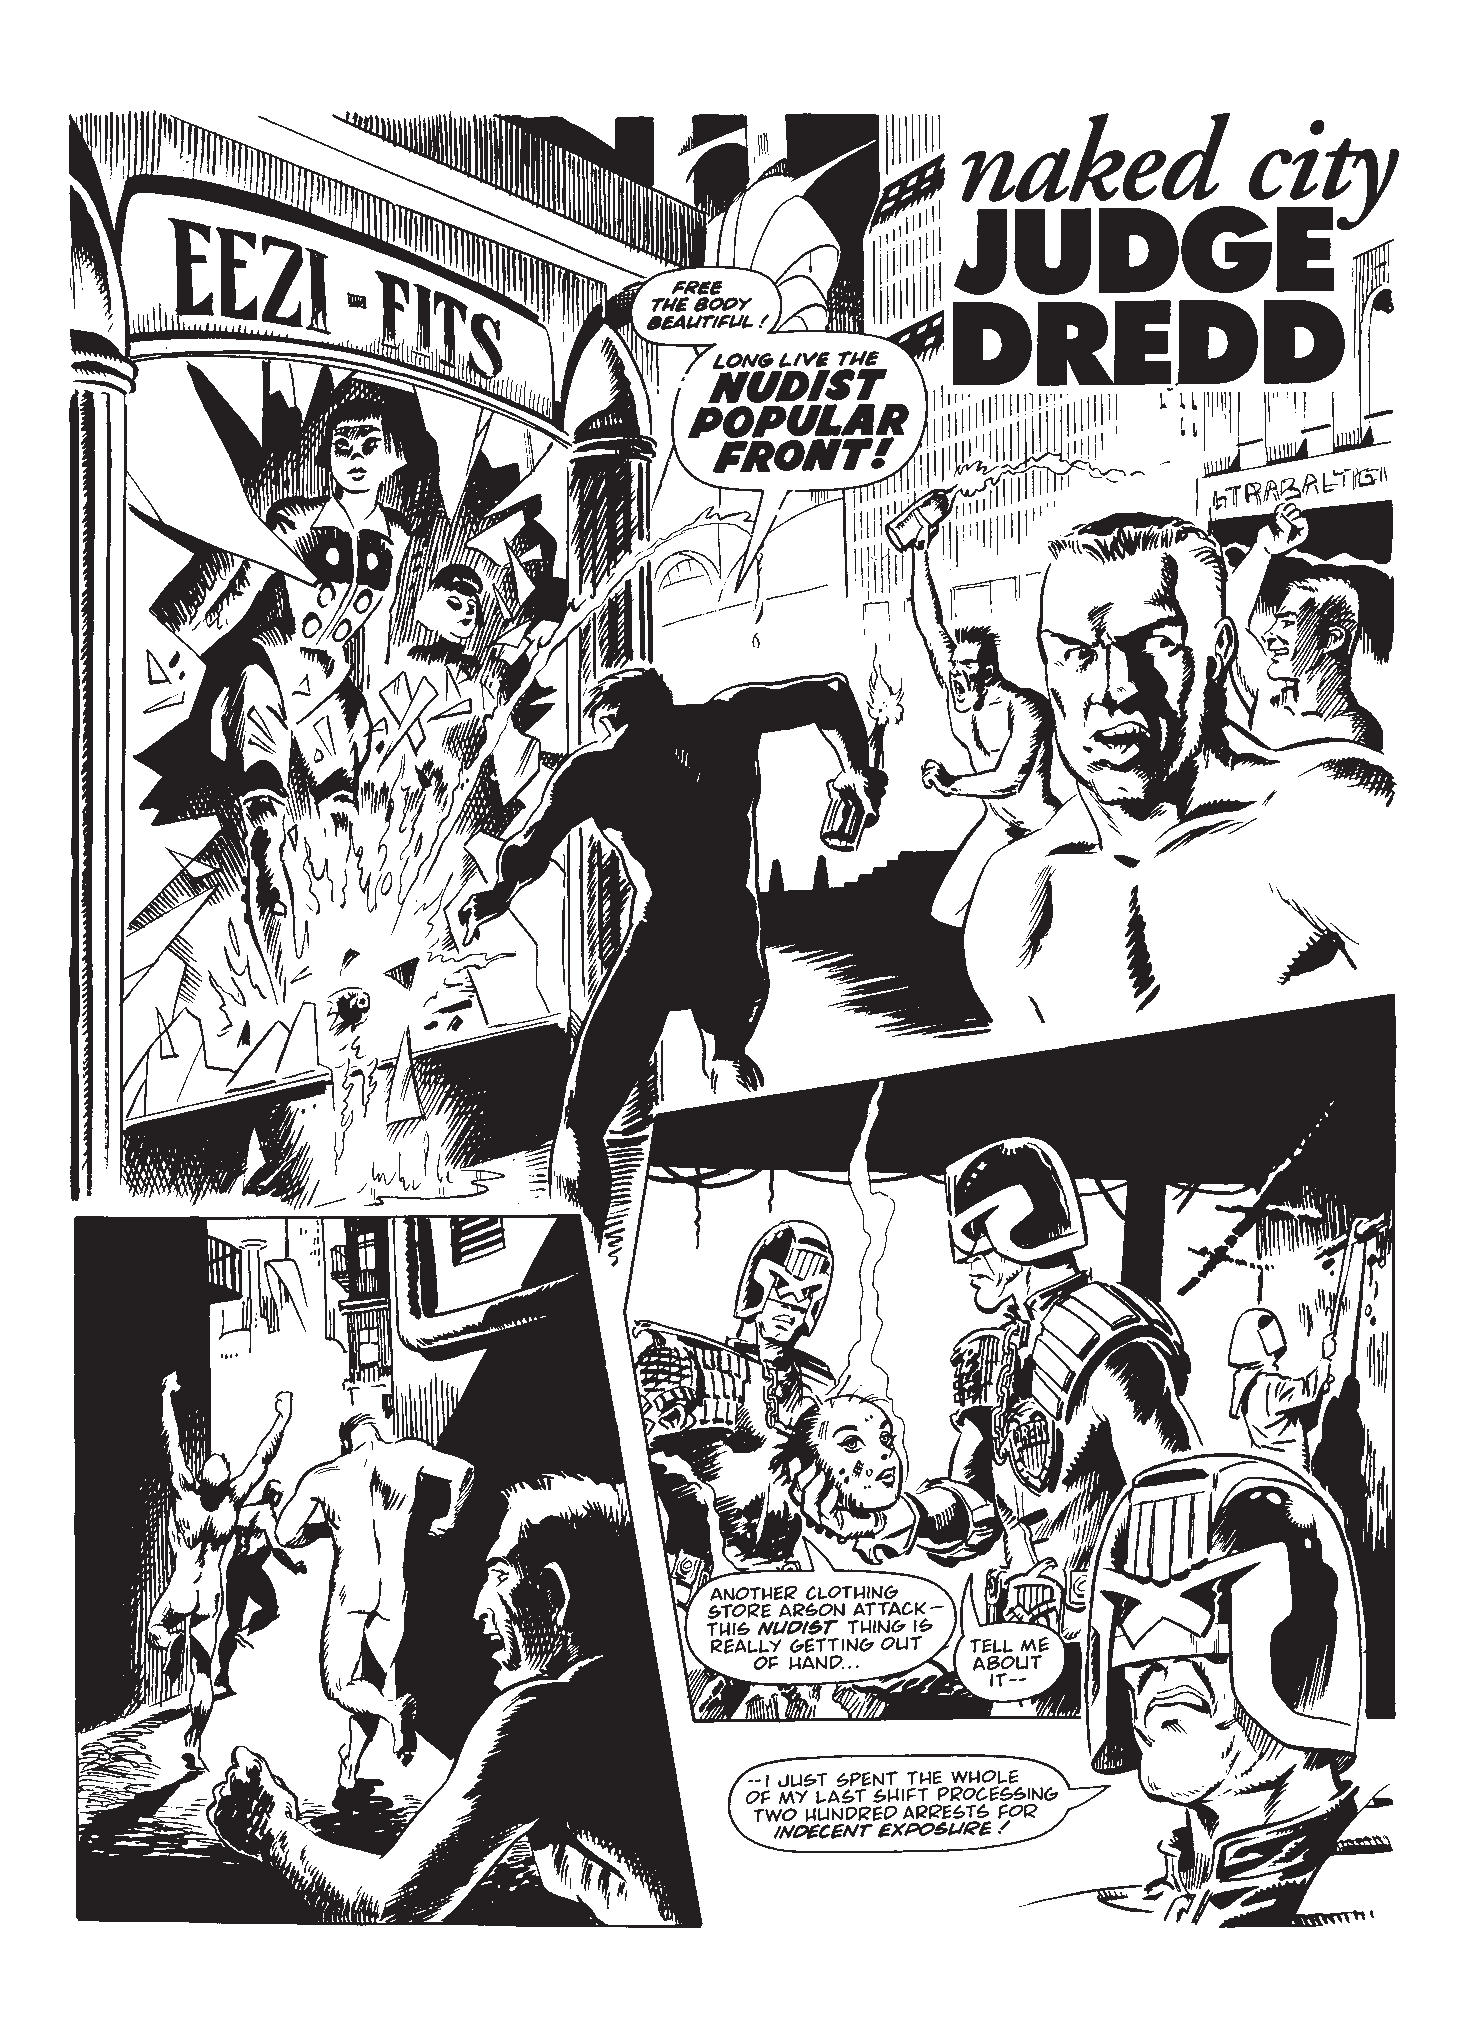 Read online Judge Dredd: The Restricted Files comic -  Issue # TPB 4 - 67